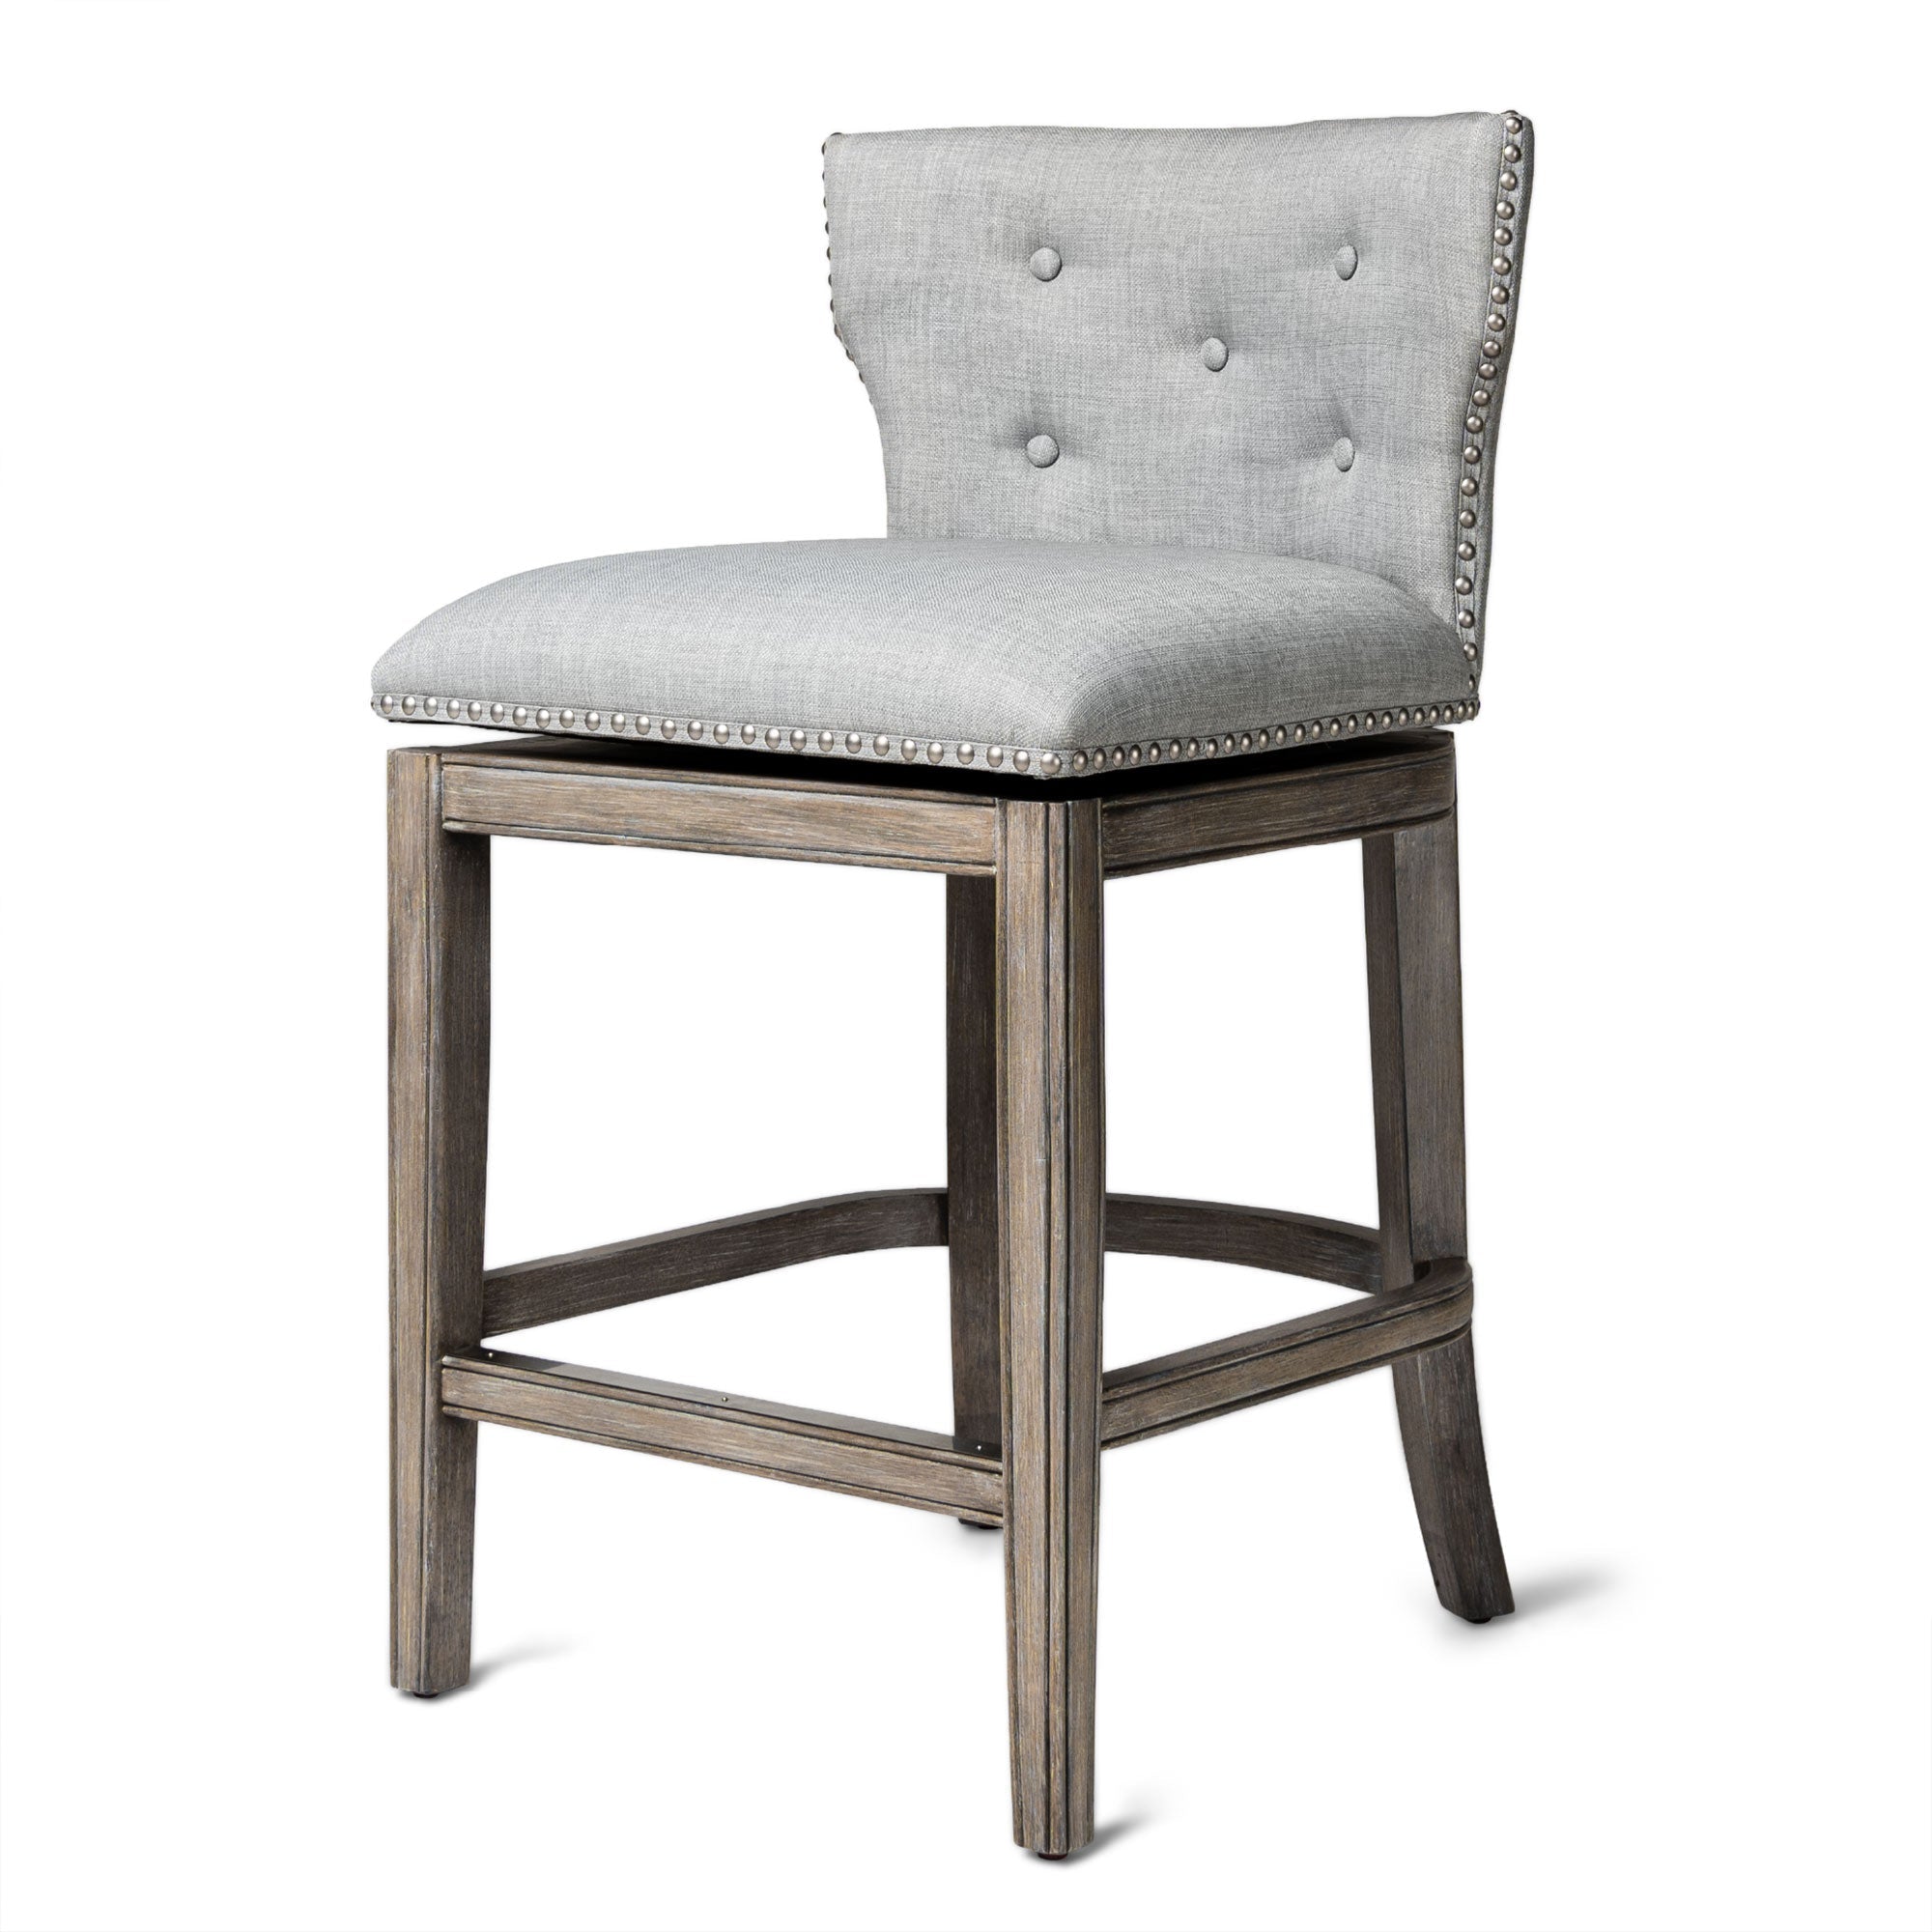 Hugo Counter Stool in Reclaimed Oak Finish with Ash Grey Fabric Upholstery in Stools by Maven Lane